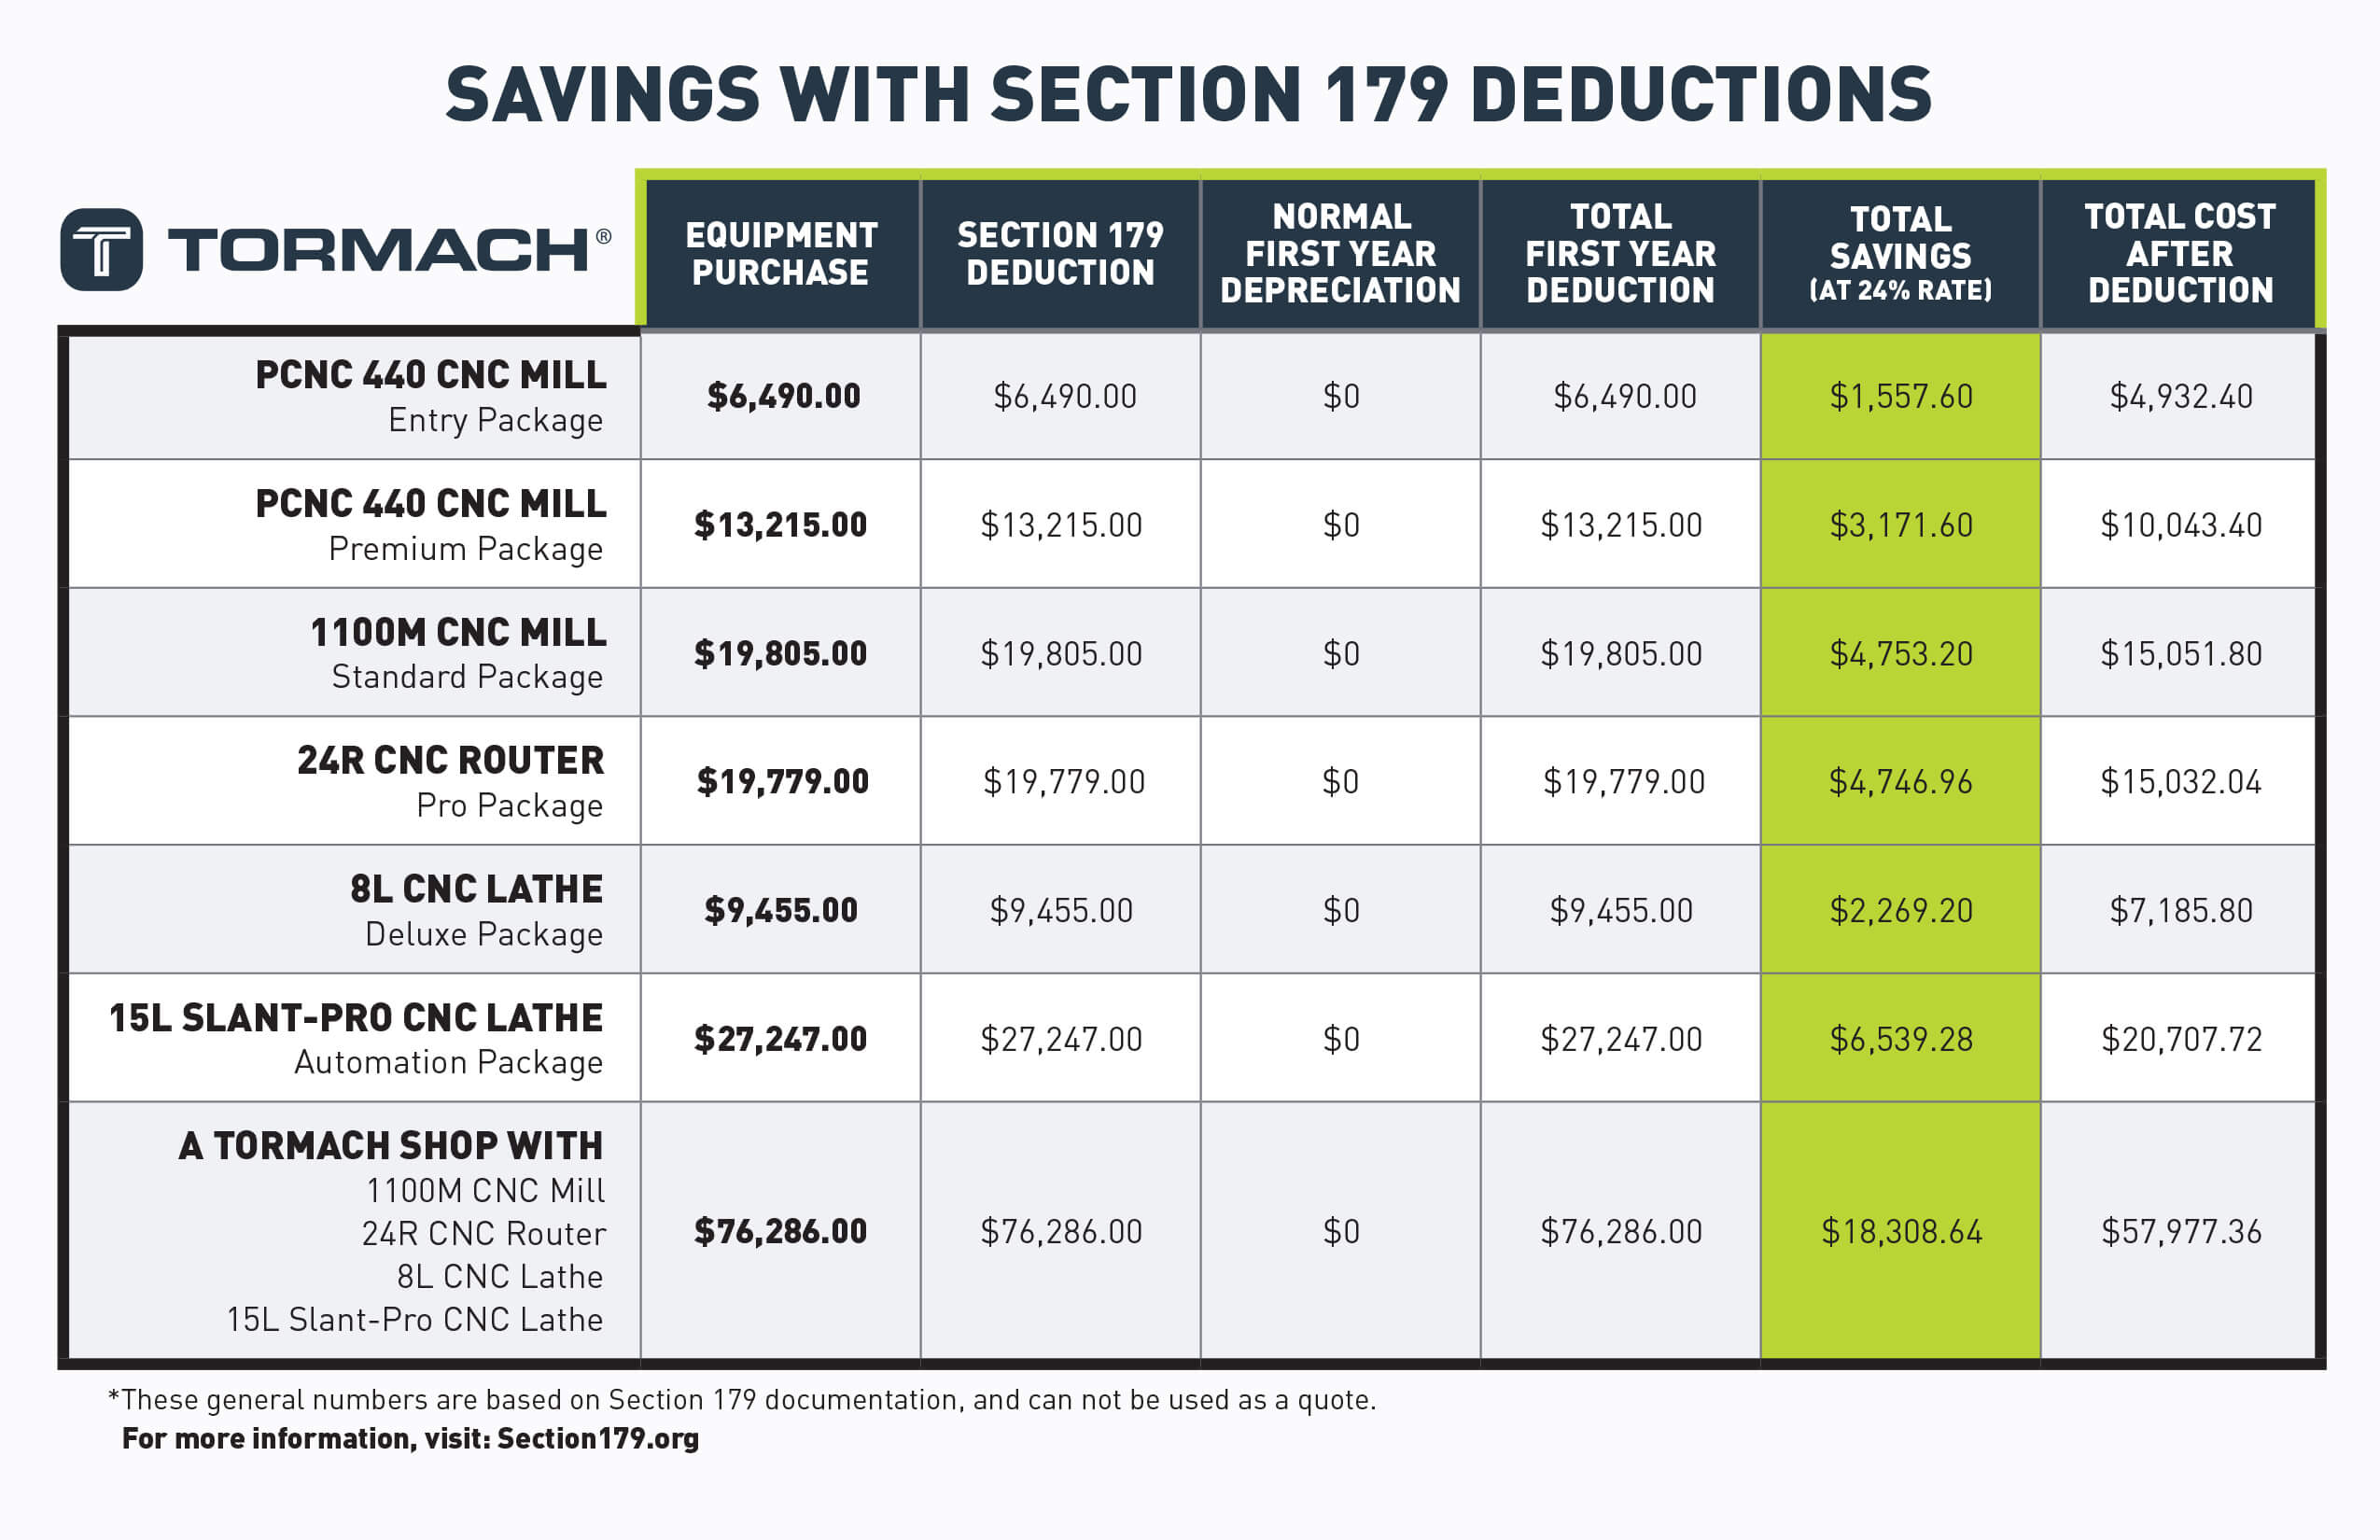 Savings-with-Section-179-Deductions-infographic-2021